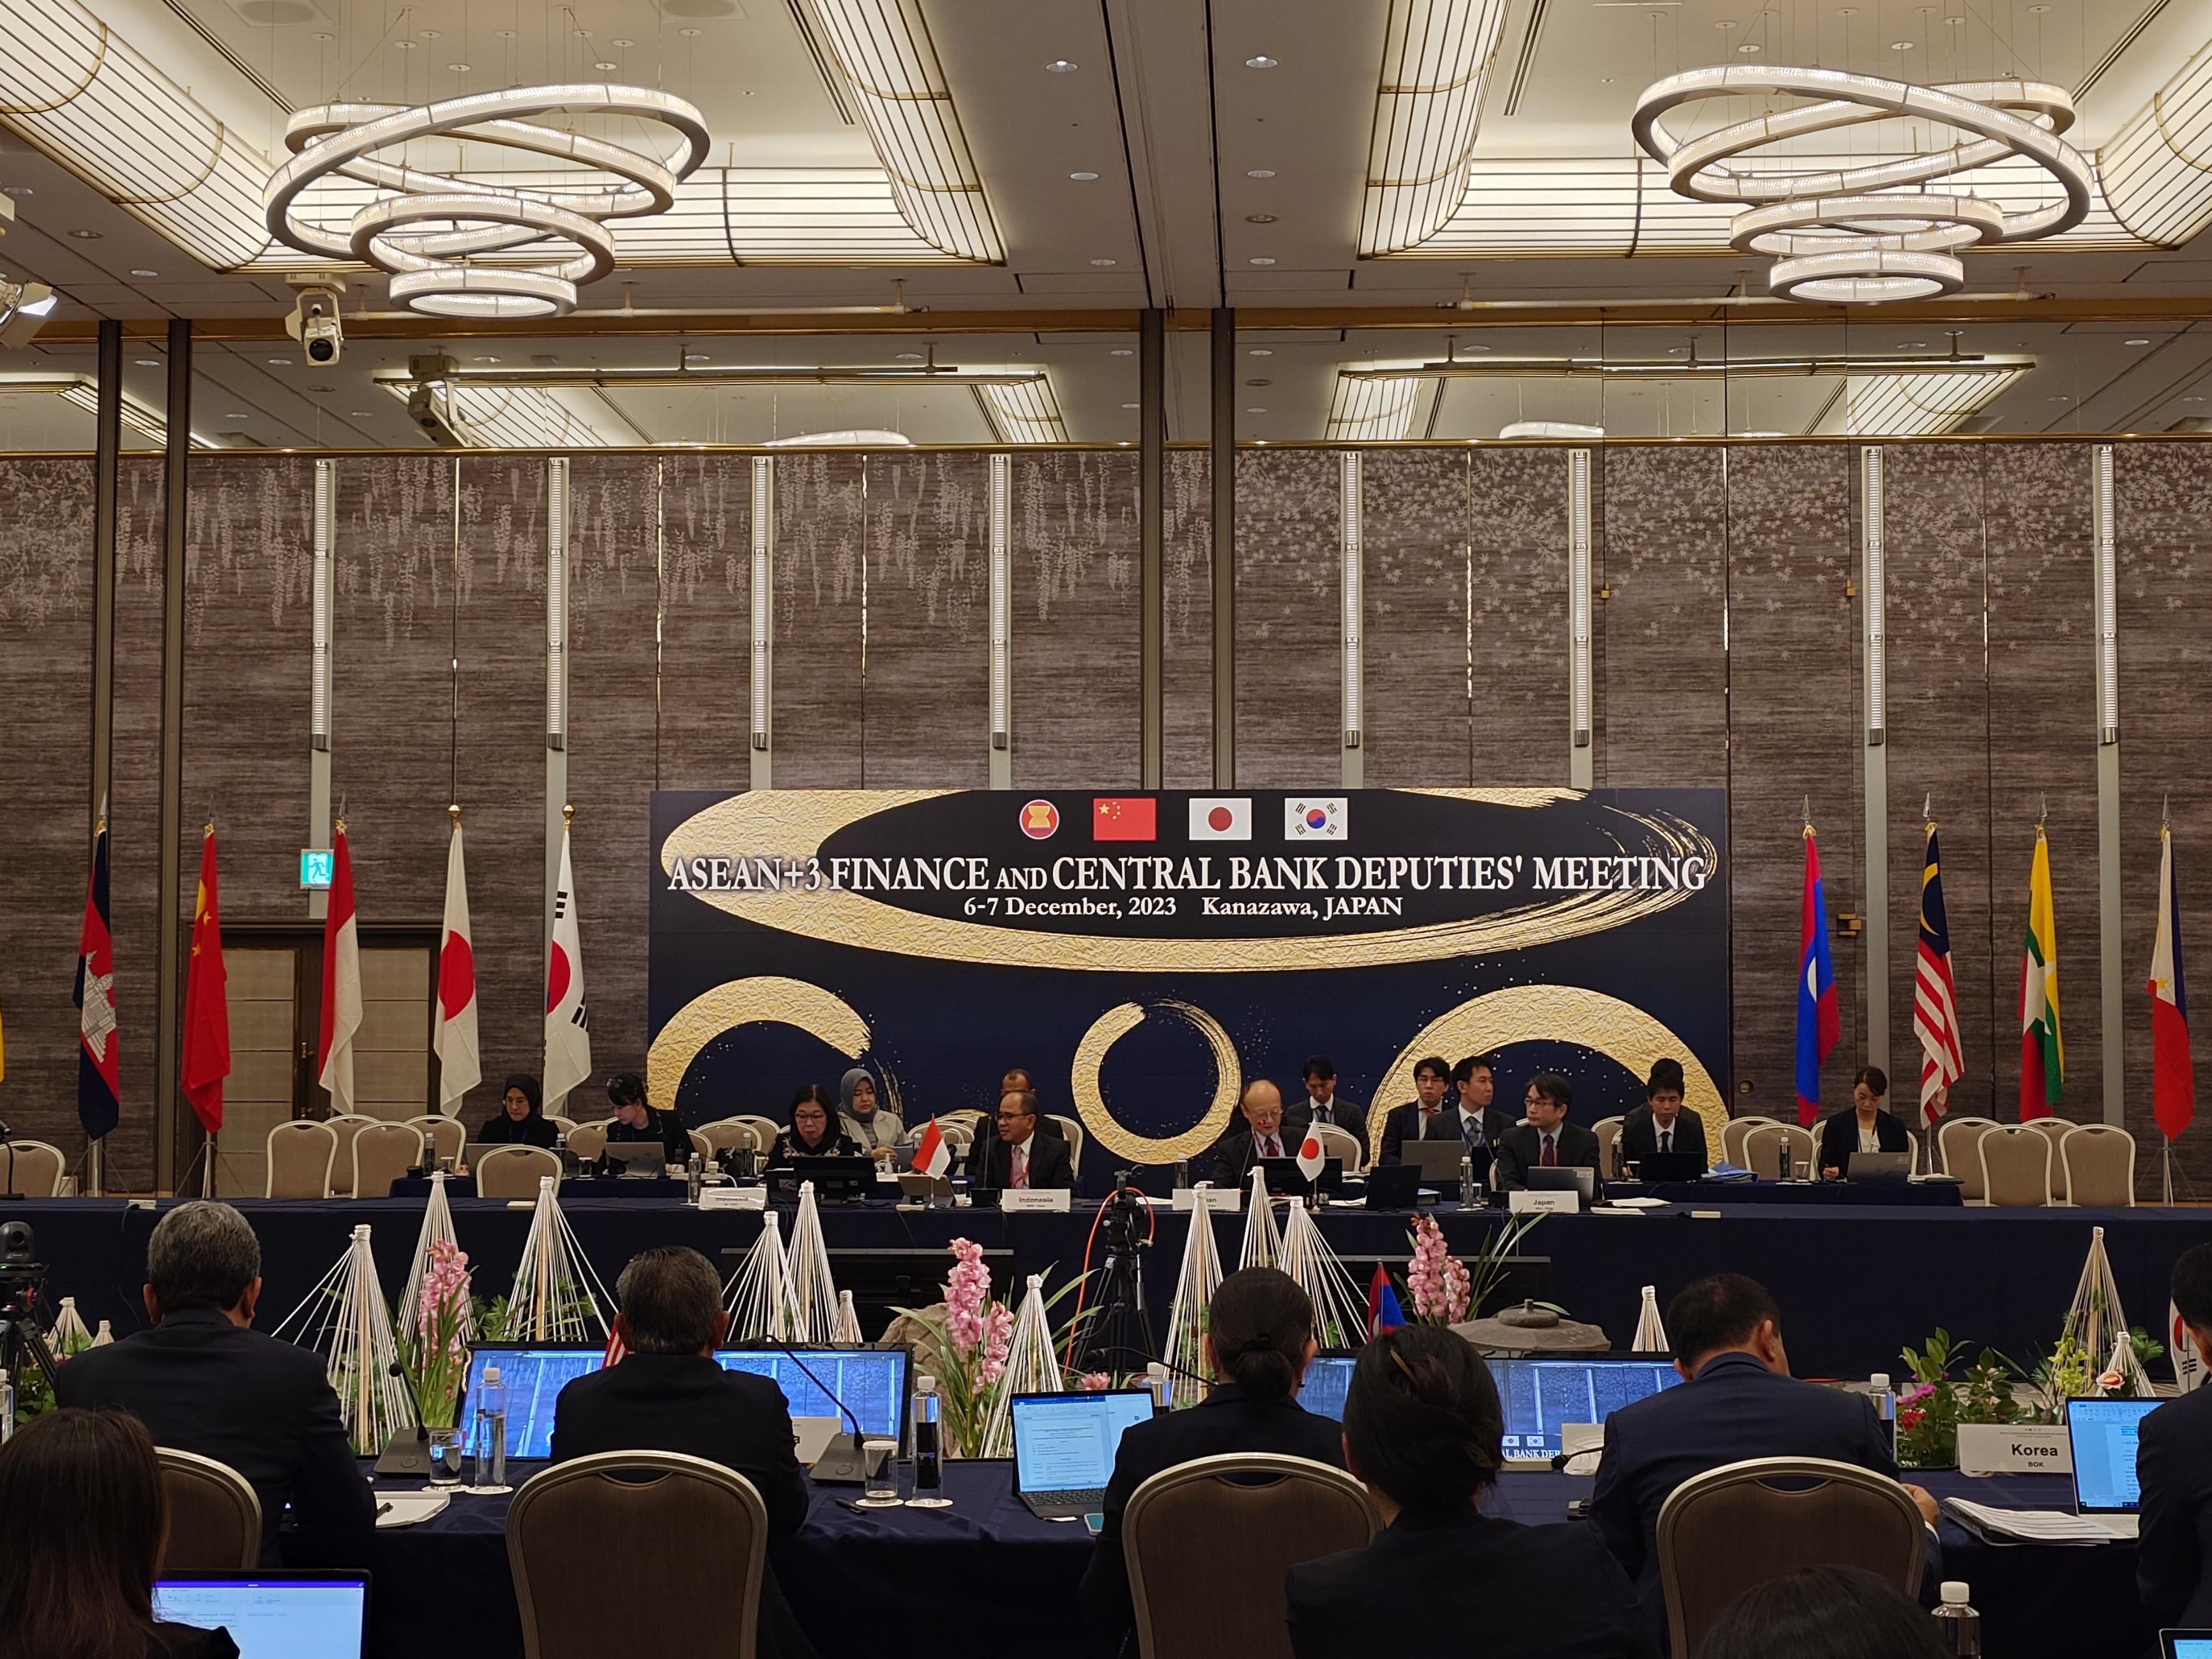 The ASEAN+3 Finance and Central Bank Deputies’ Meeting